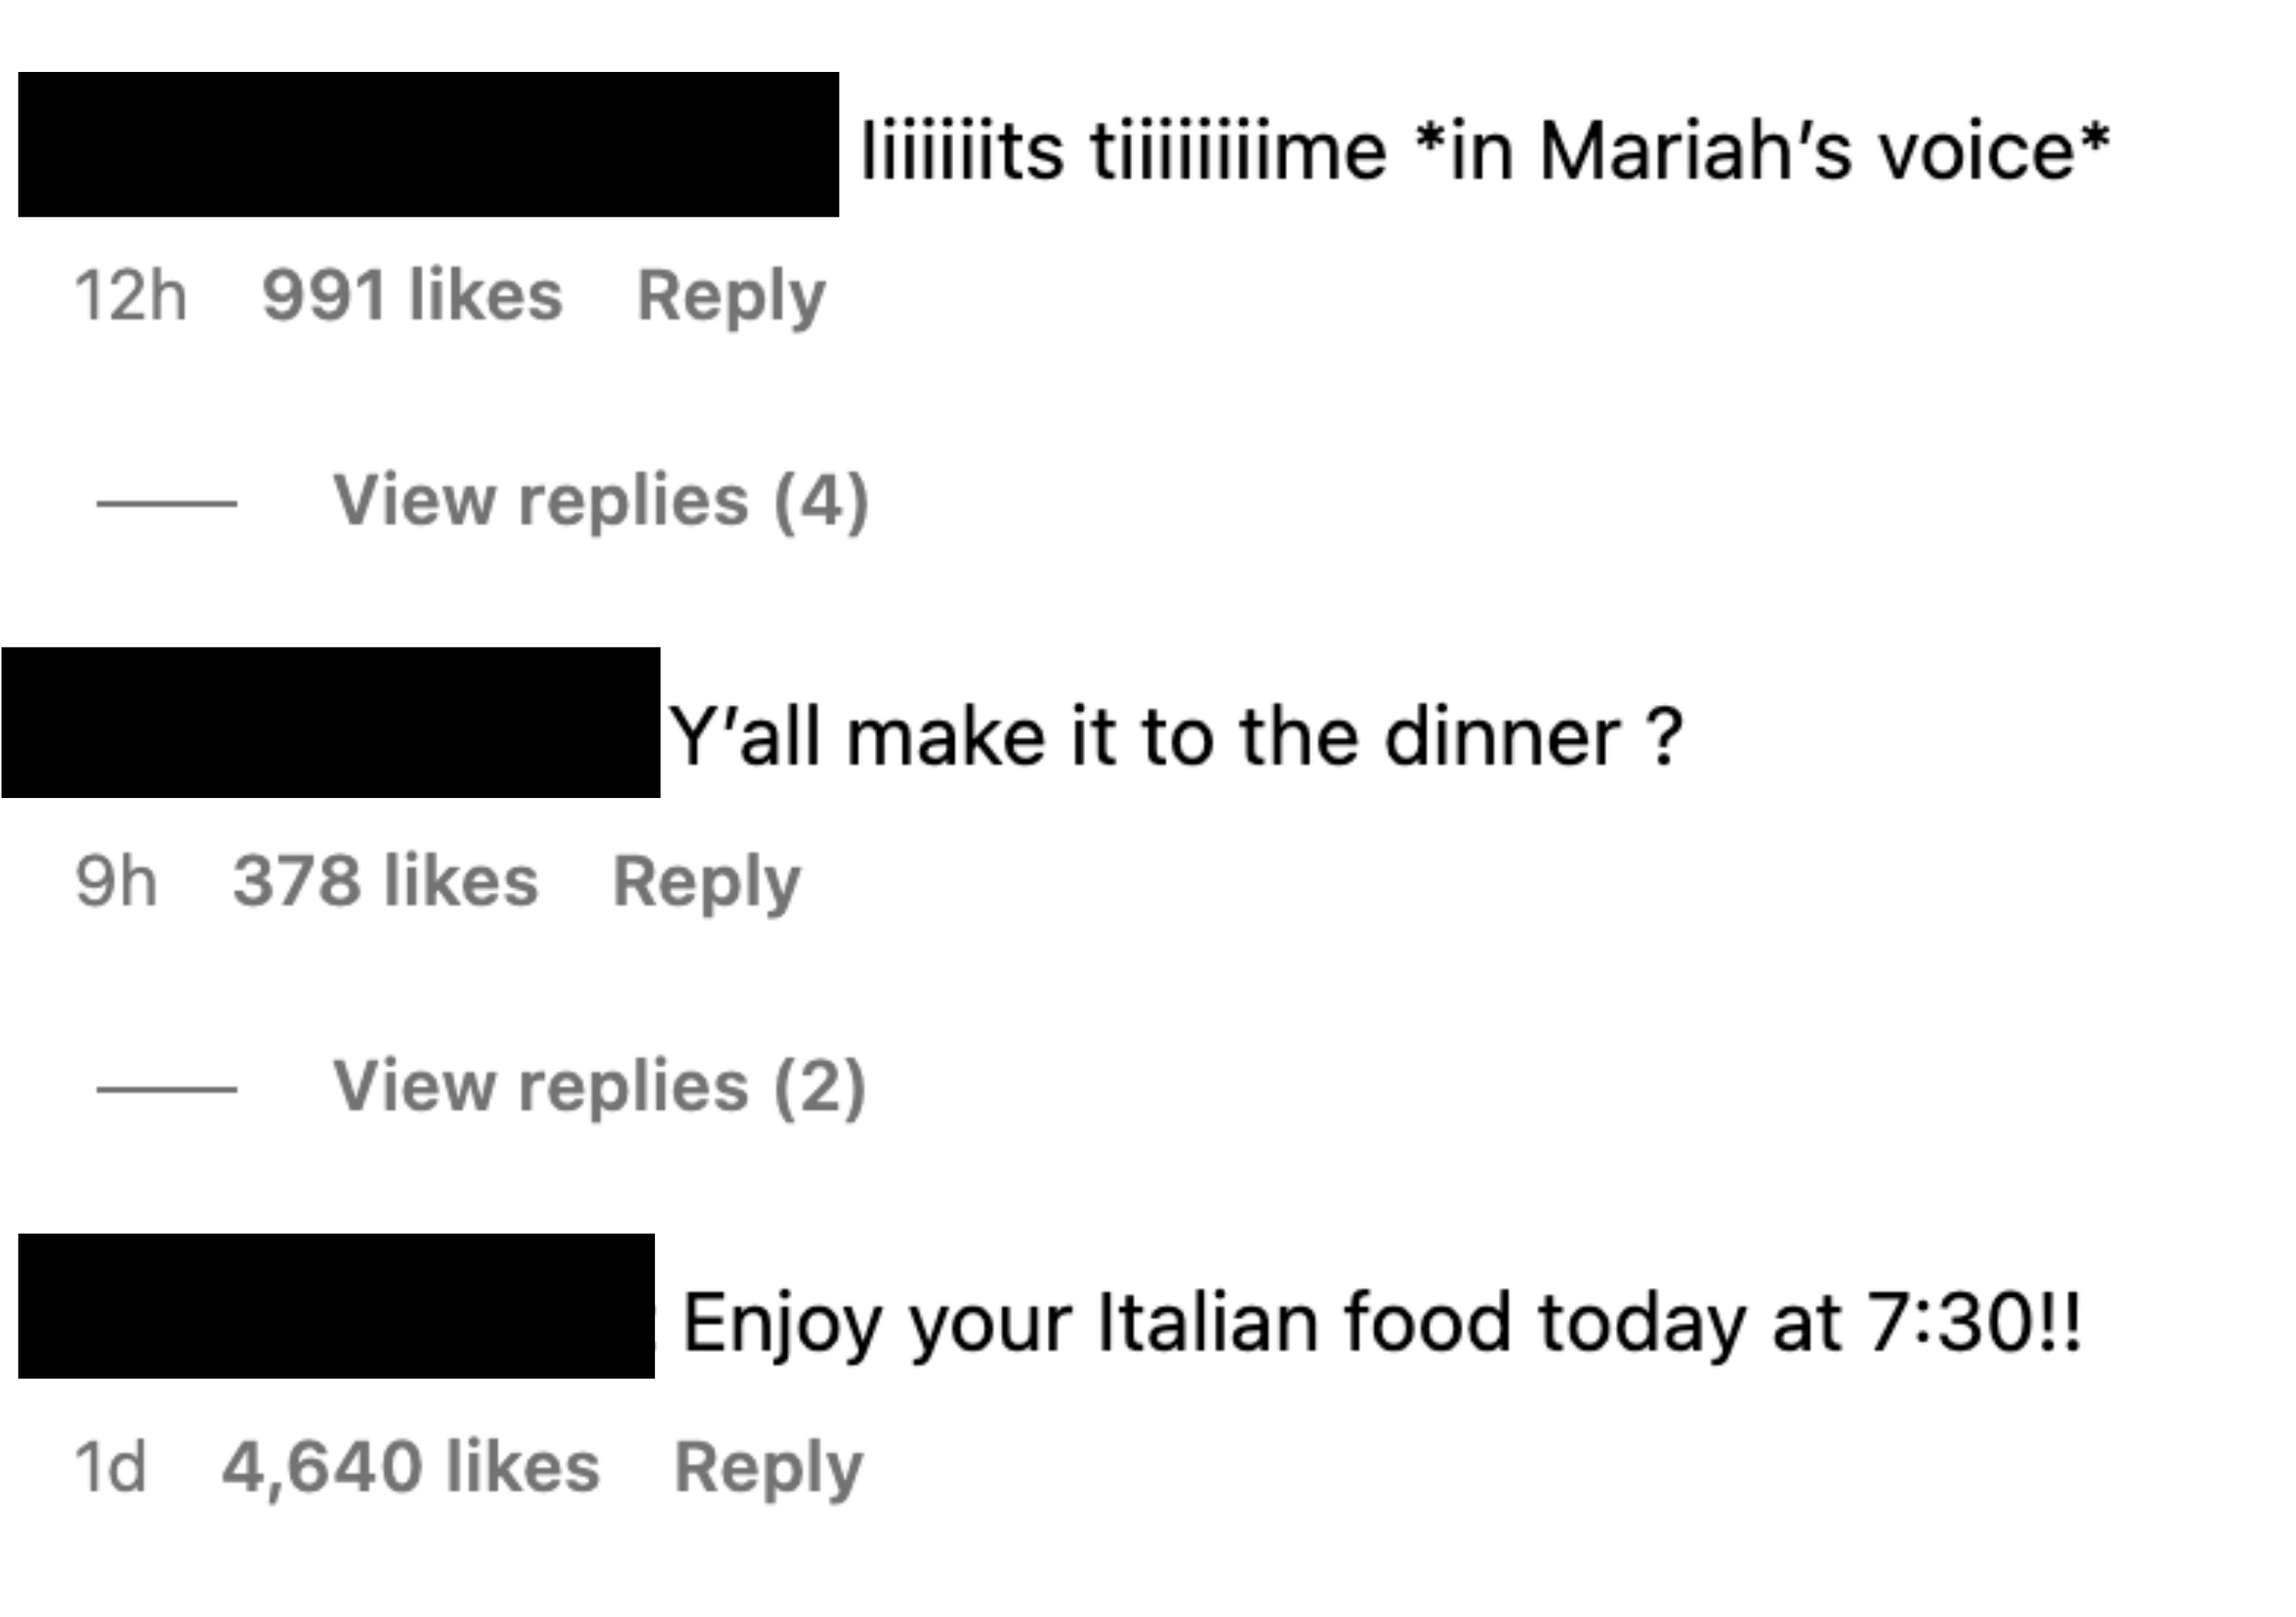 Comments: &quot;Iiiiiits tiiiiime *in Mariah&#x27;s voice*,&quot; &quot;Y&#x27;all make it to the dinner?&quot; and &quot;Enjoy your Italian food today at 7:30!!&quot;